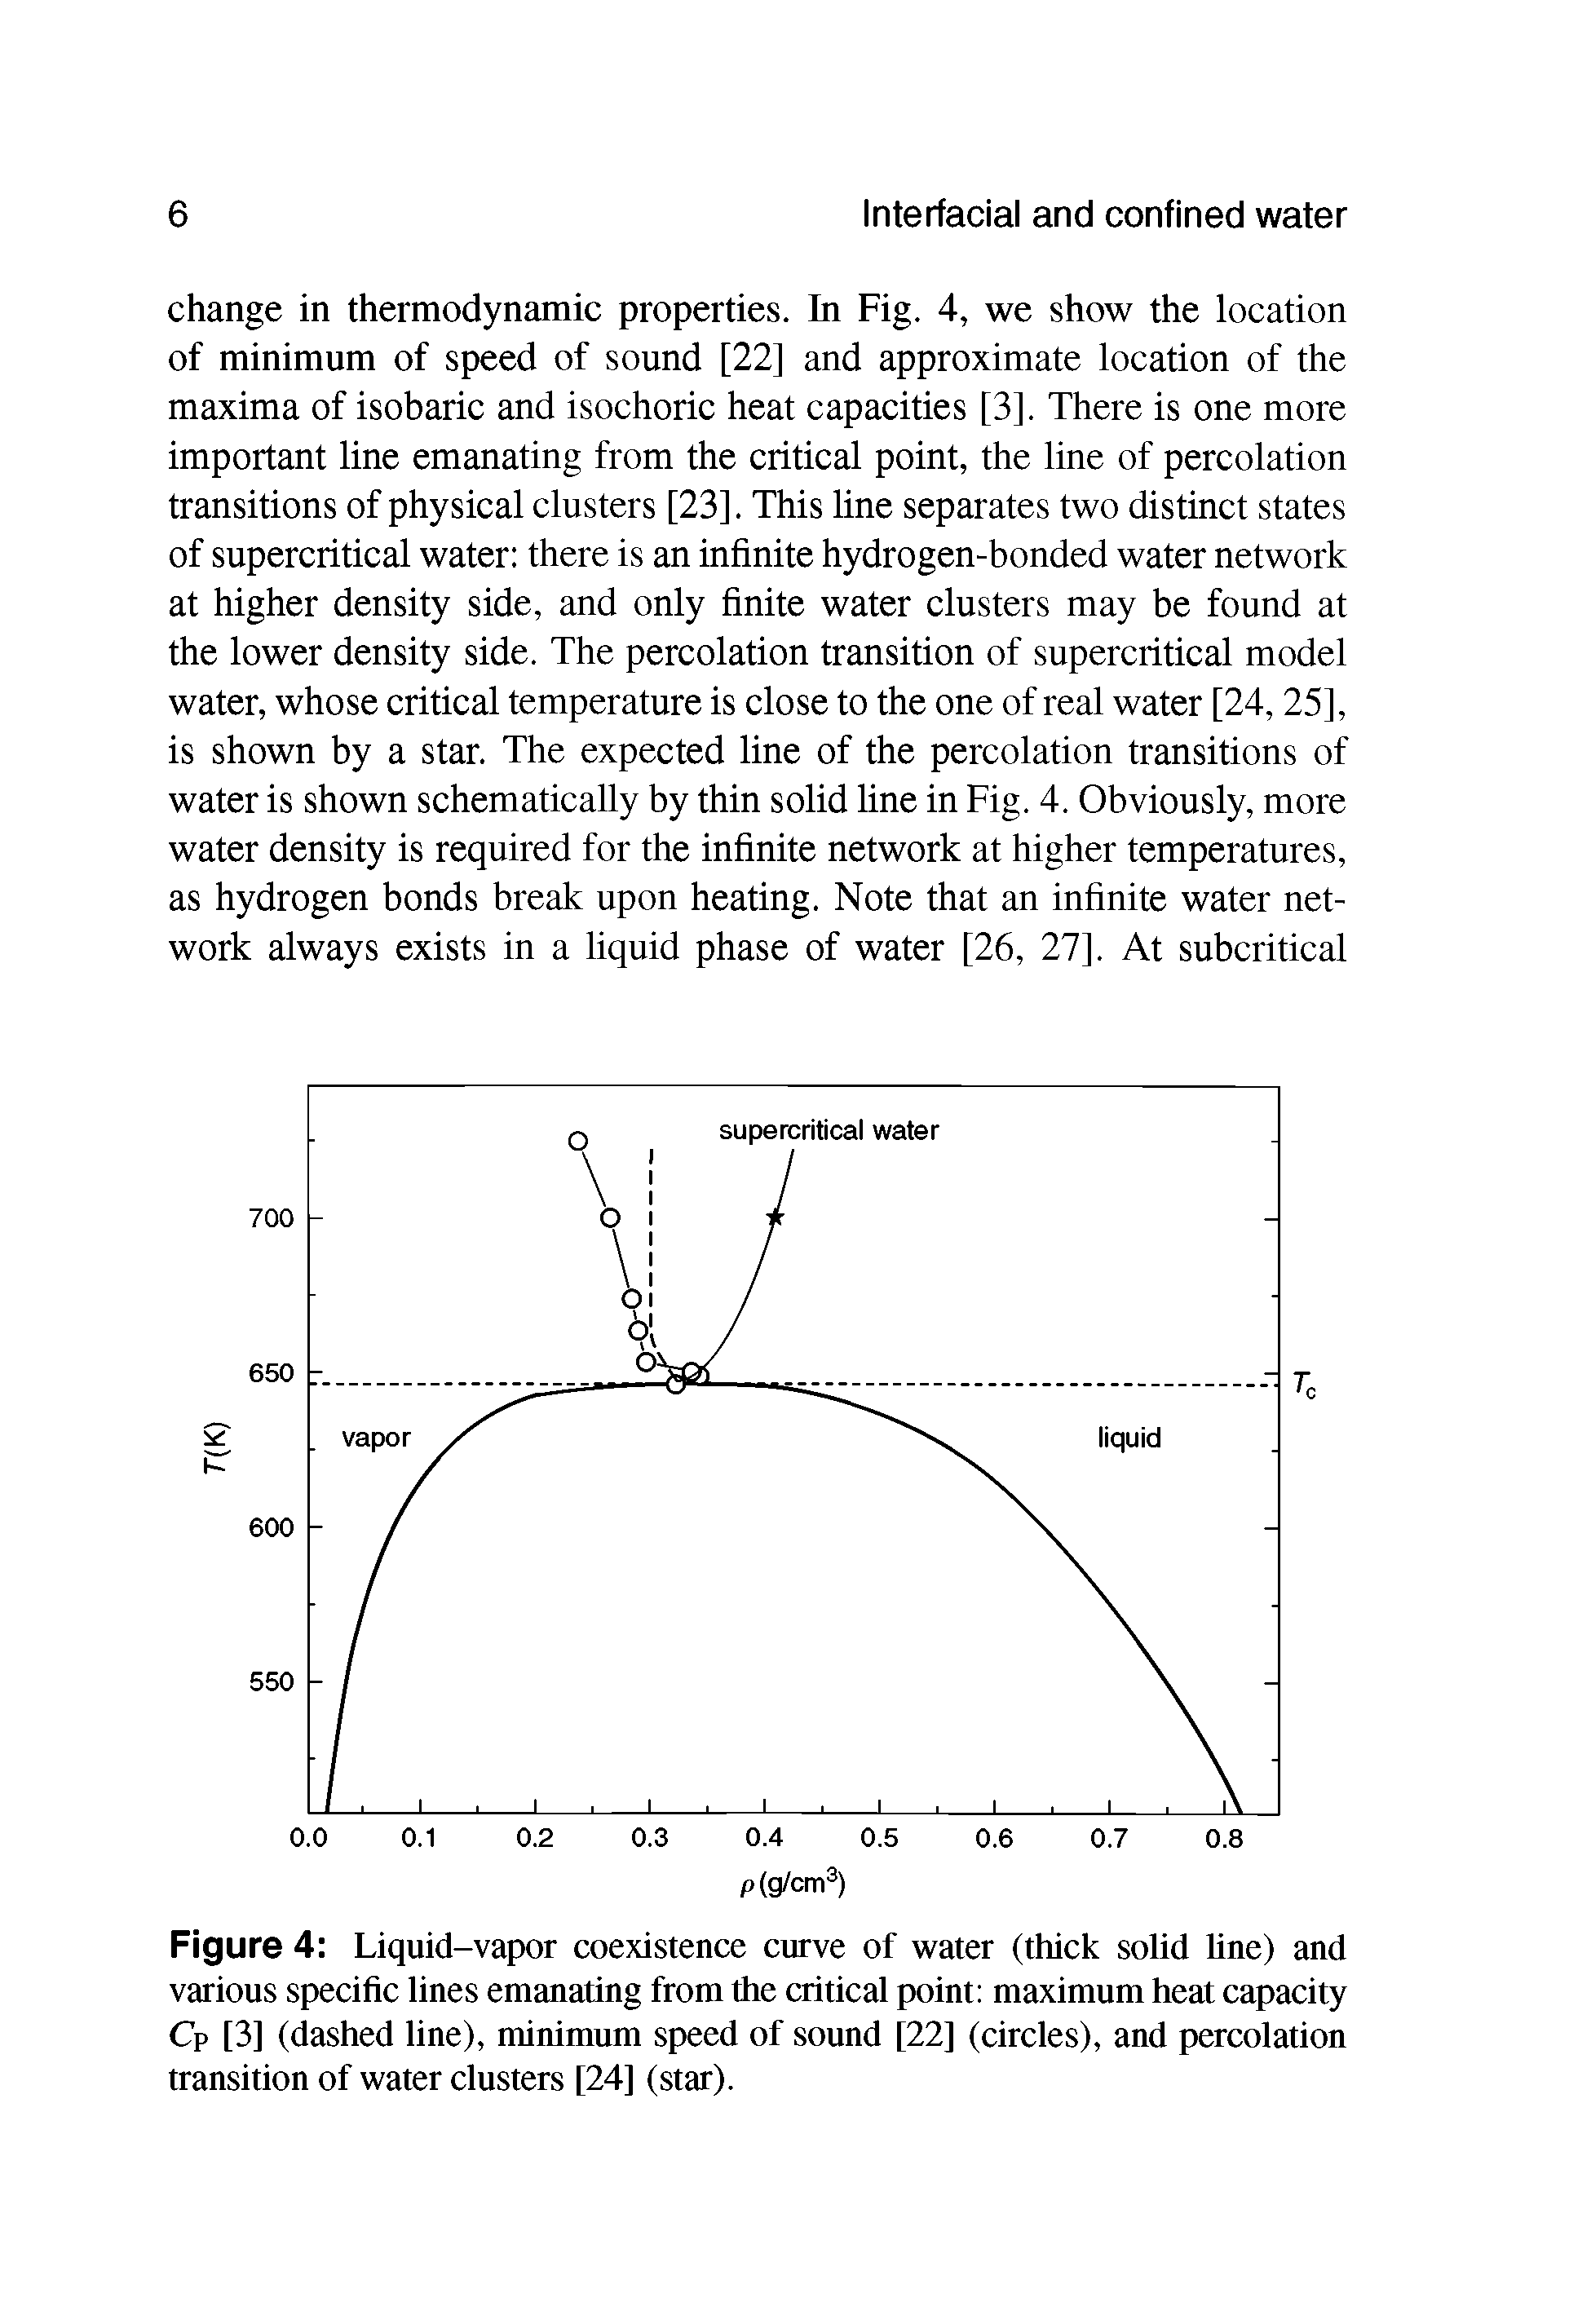 Figure 4 Liquid-vapor coexistence curve of water (thick solid line) and various specific lines emanating from the critical point maximum heat capacity Cp [3] (dashed line), minimum speed of sound [22] (circles), and percolation transition of water clusters [24] (star).